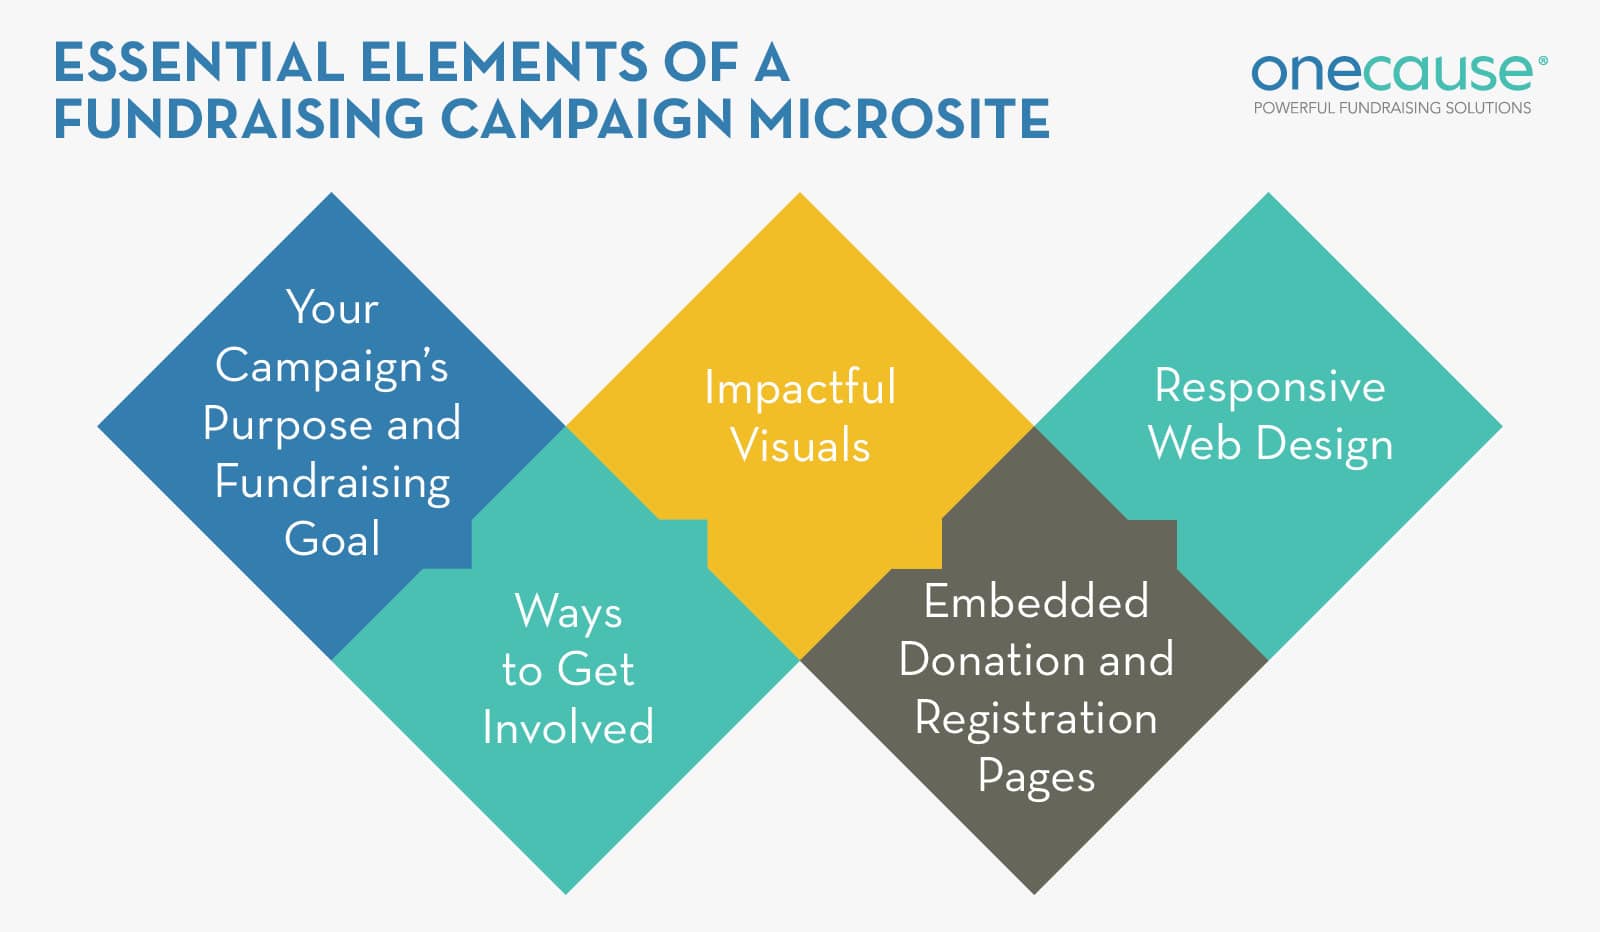 A fundraising campaign microsite should explain to visitors the purpose behind your fundraiser and how they can help